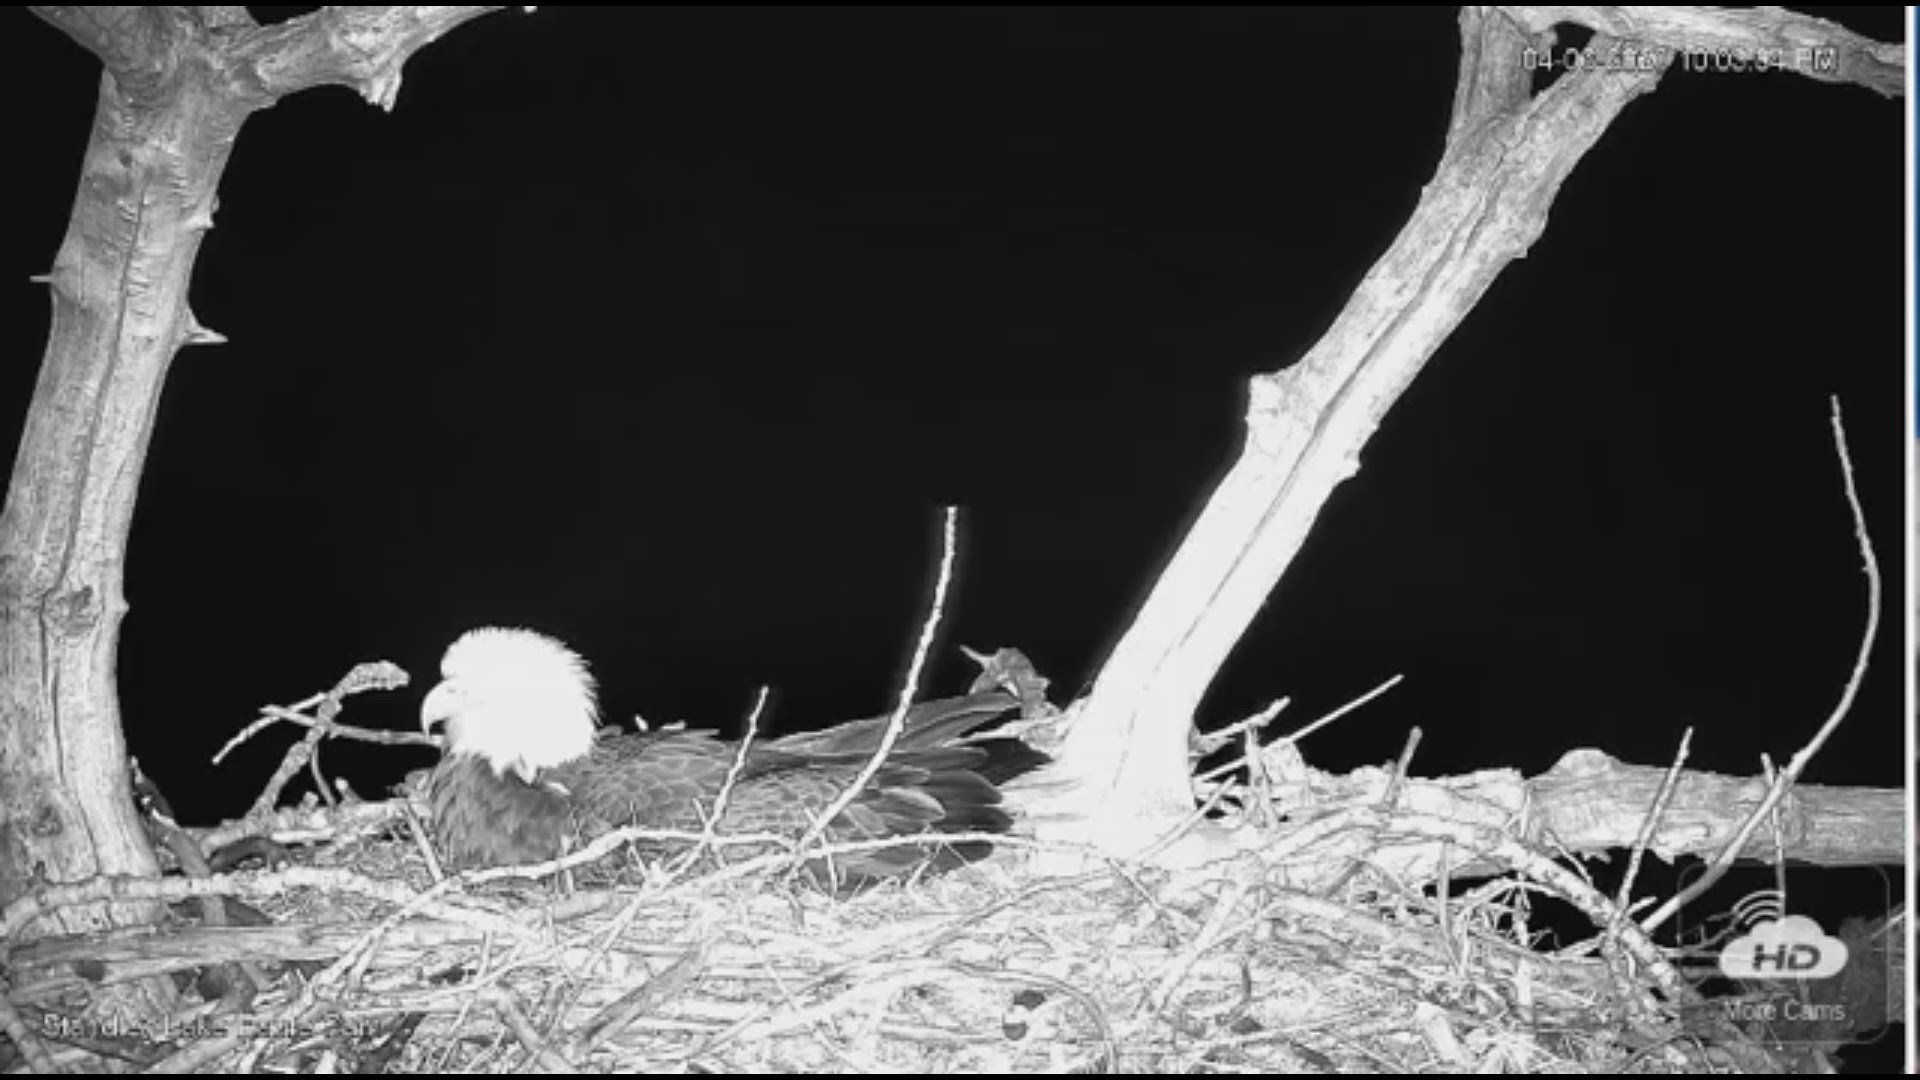 A mystery intruder was caught on camera trying to attack the Standley Lake eagle's nest. Courtesy Standley Lake Park.